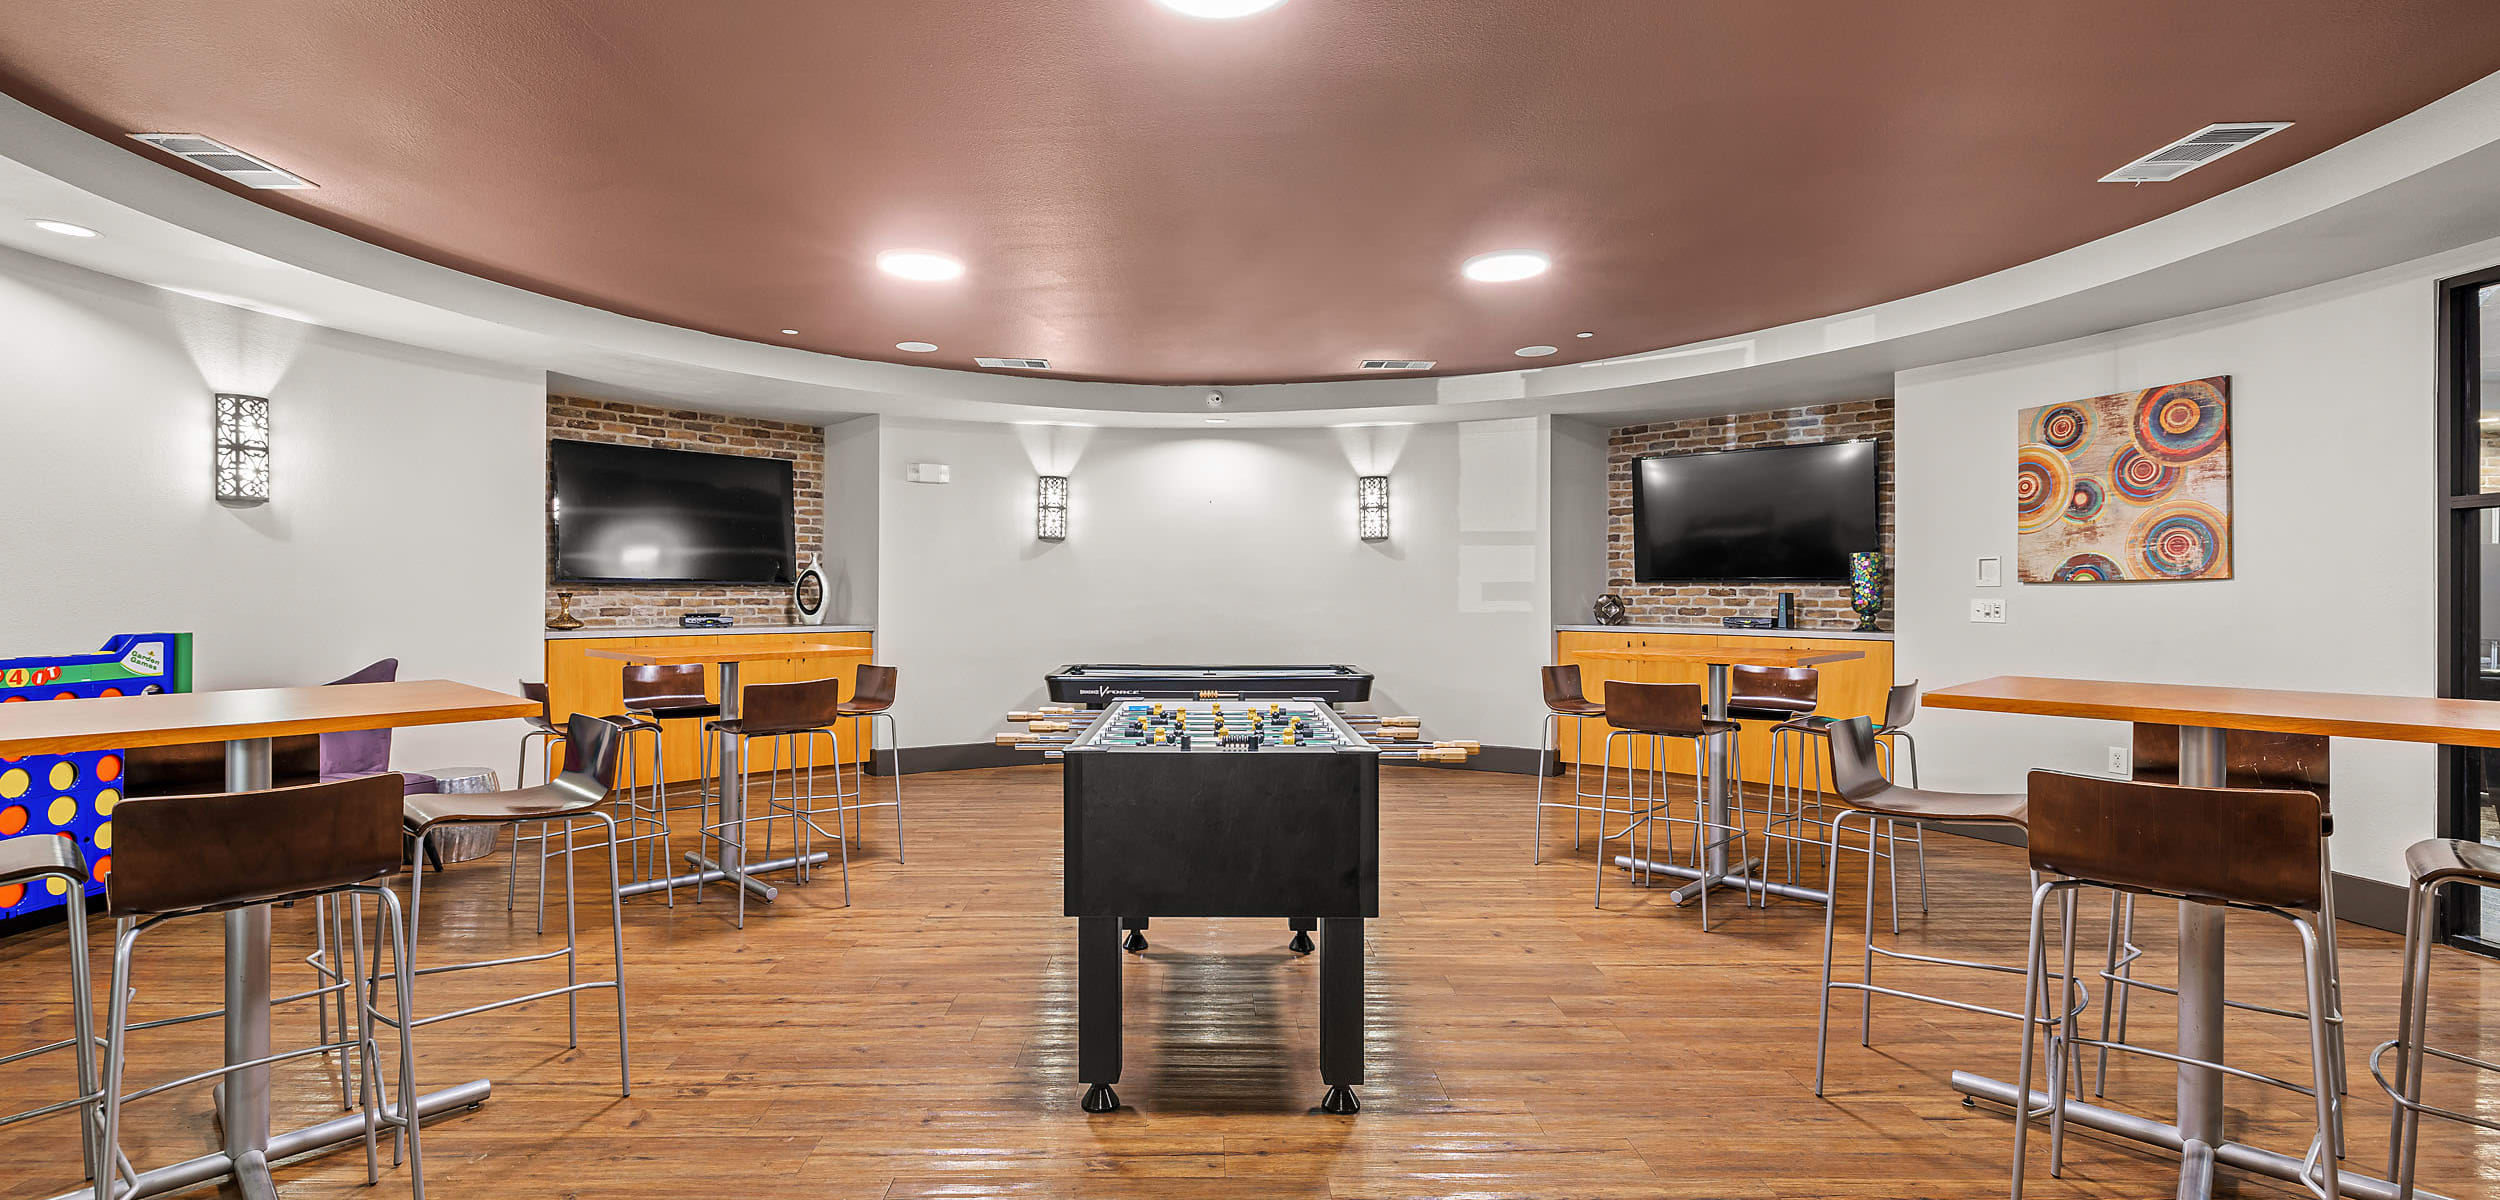 Recreation room with tables at Regents West at 26th in Austin, Texas